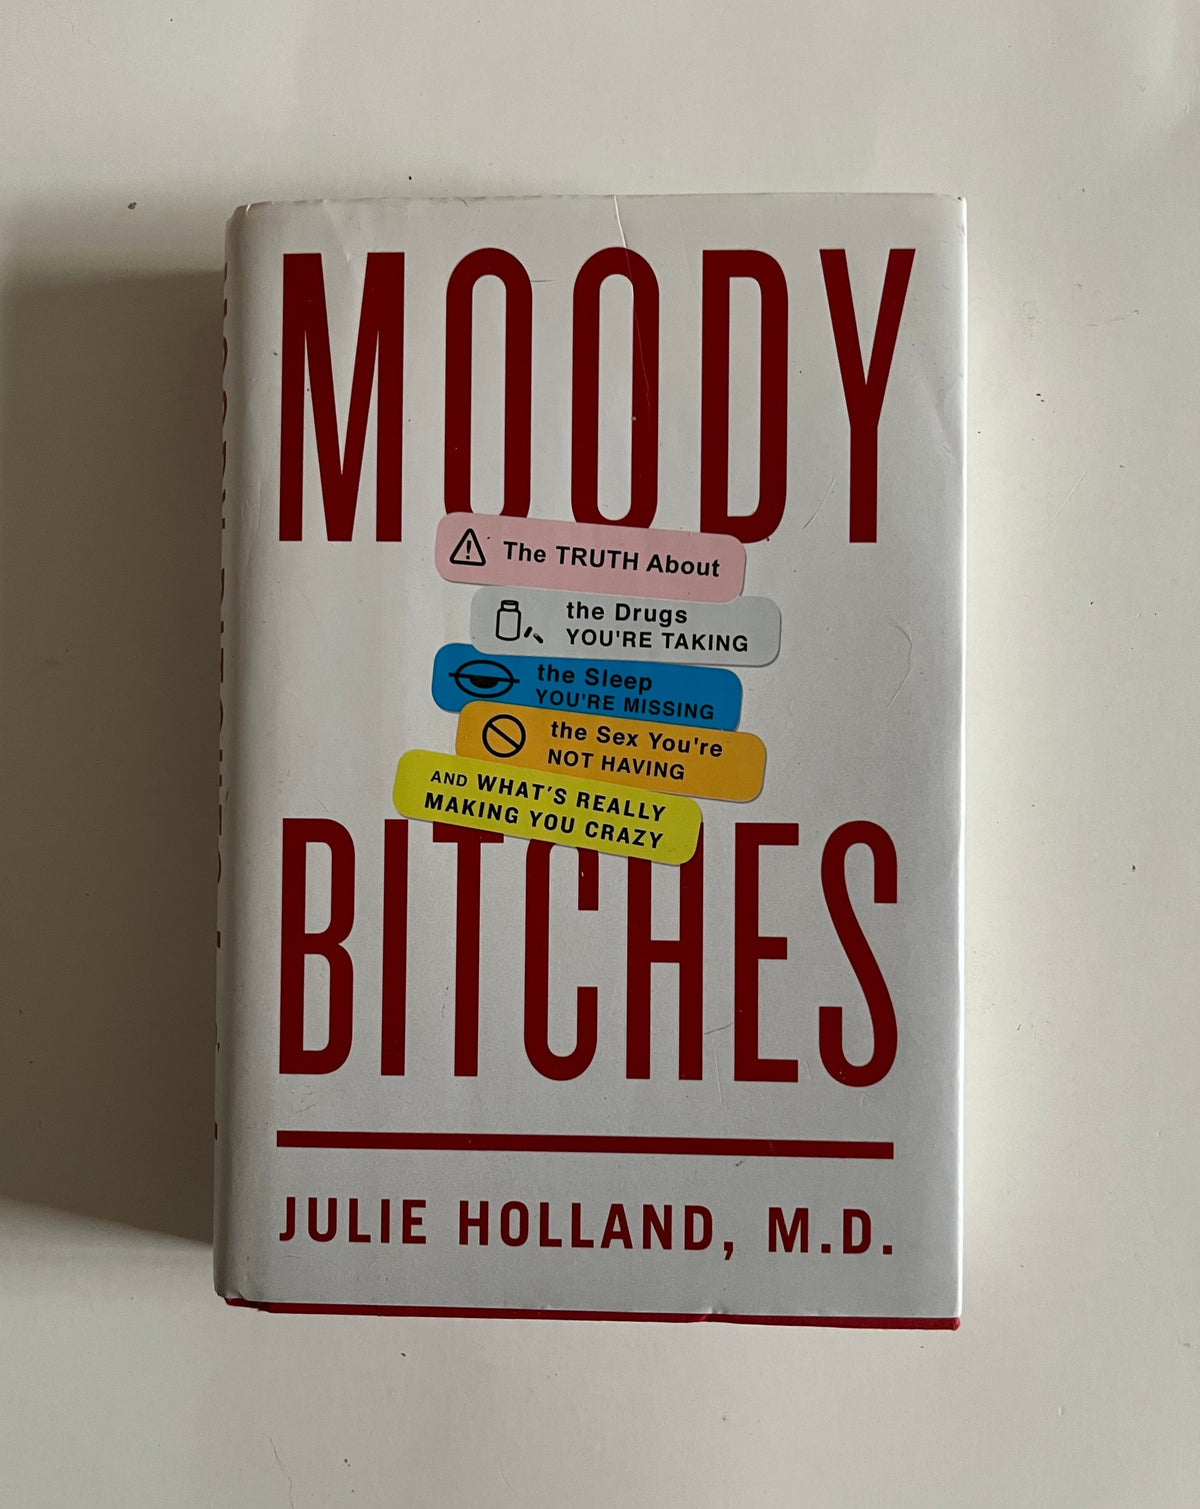 Moody Bitches: The Truth About the Drugs You&#39;re Taking, The Sleep You&#39;re Missing, The Sex You&#39;re Not Having, and What&#39;s Really Making You Crazy by Julie Holland